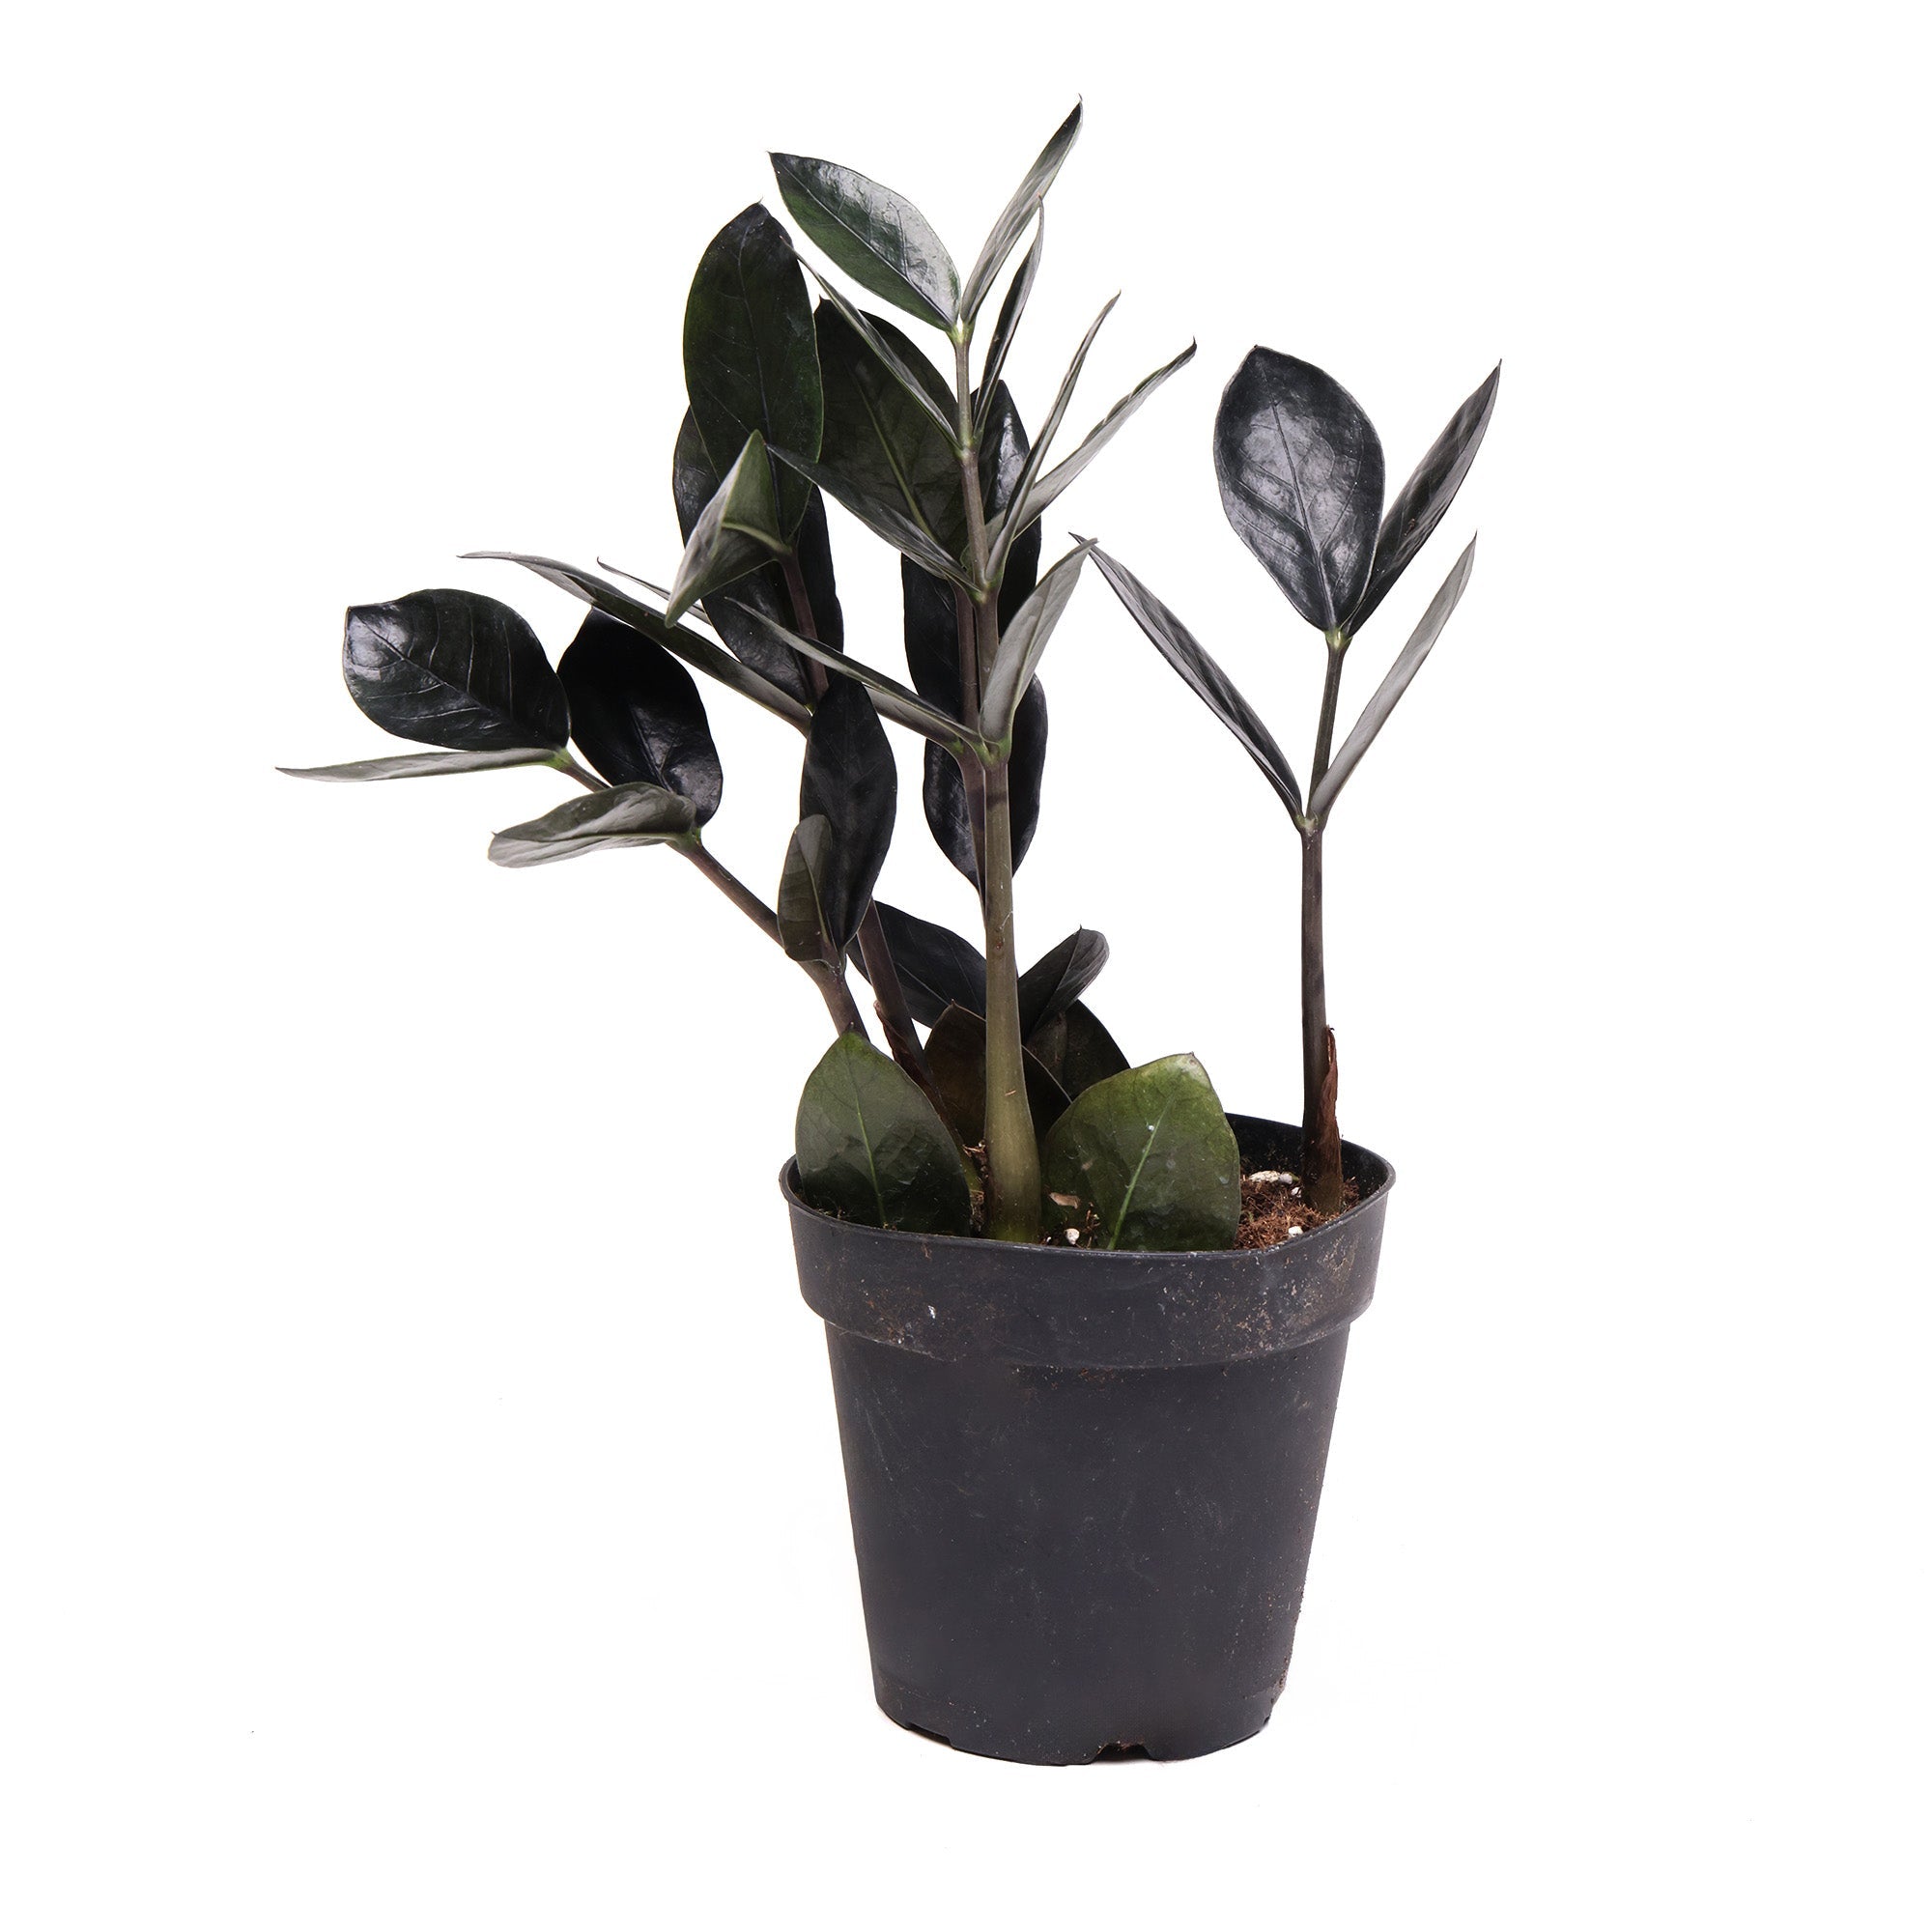 A Chive Studio 2024 ZZ Plant 4 Inches with a few thick, dark green, and glossy leaves. The plant is in a black plastic pot filled with soil. The background is white and the plant appears healthy.